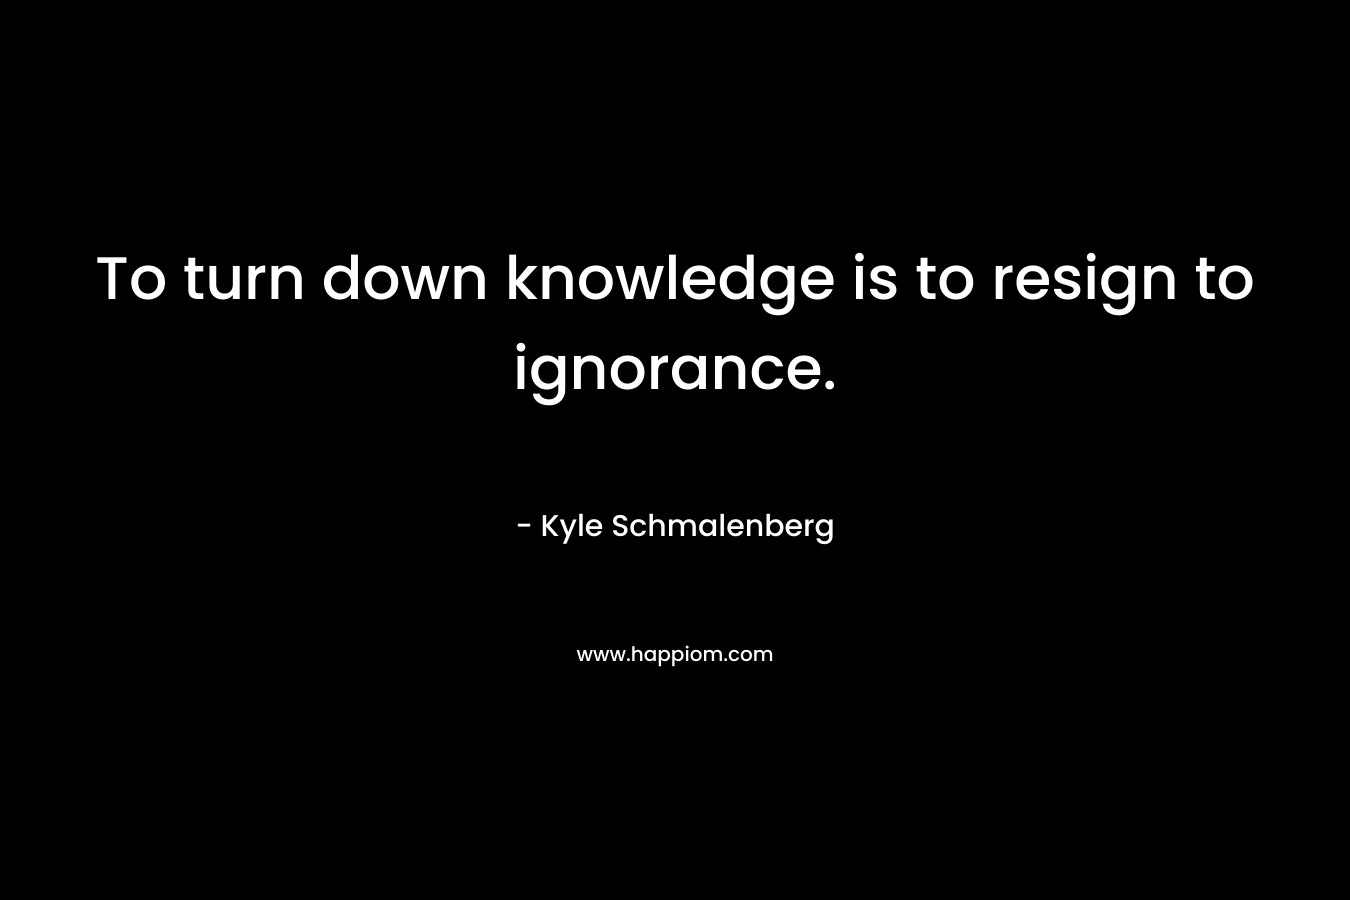 To turn down knowledge is to resign to ignorance. – Kyle Schmalenberg